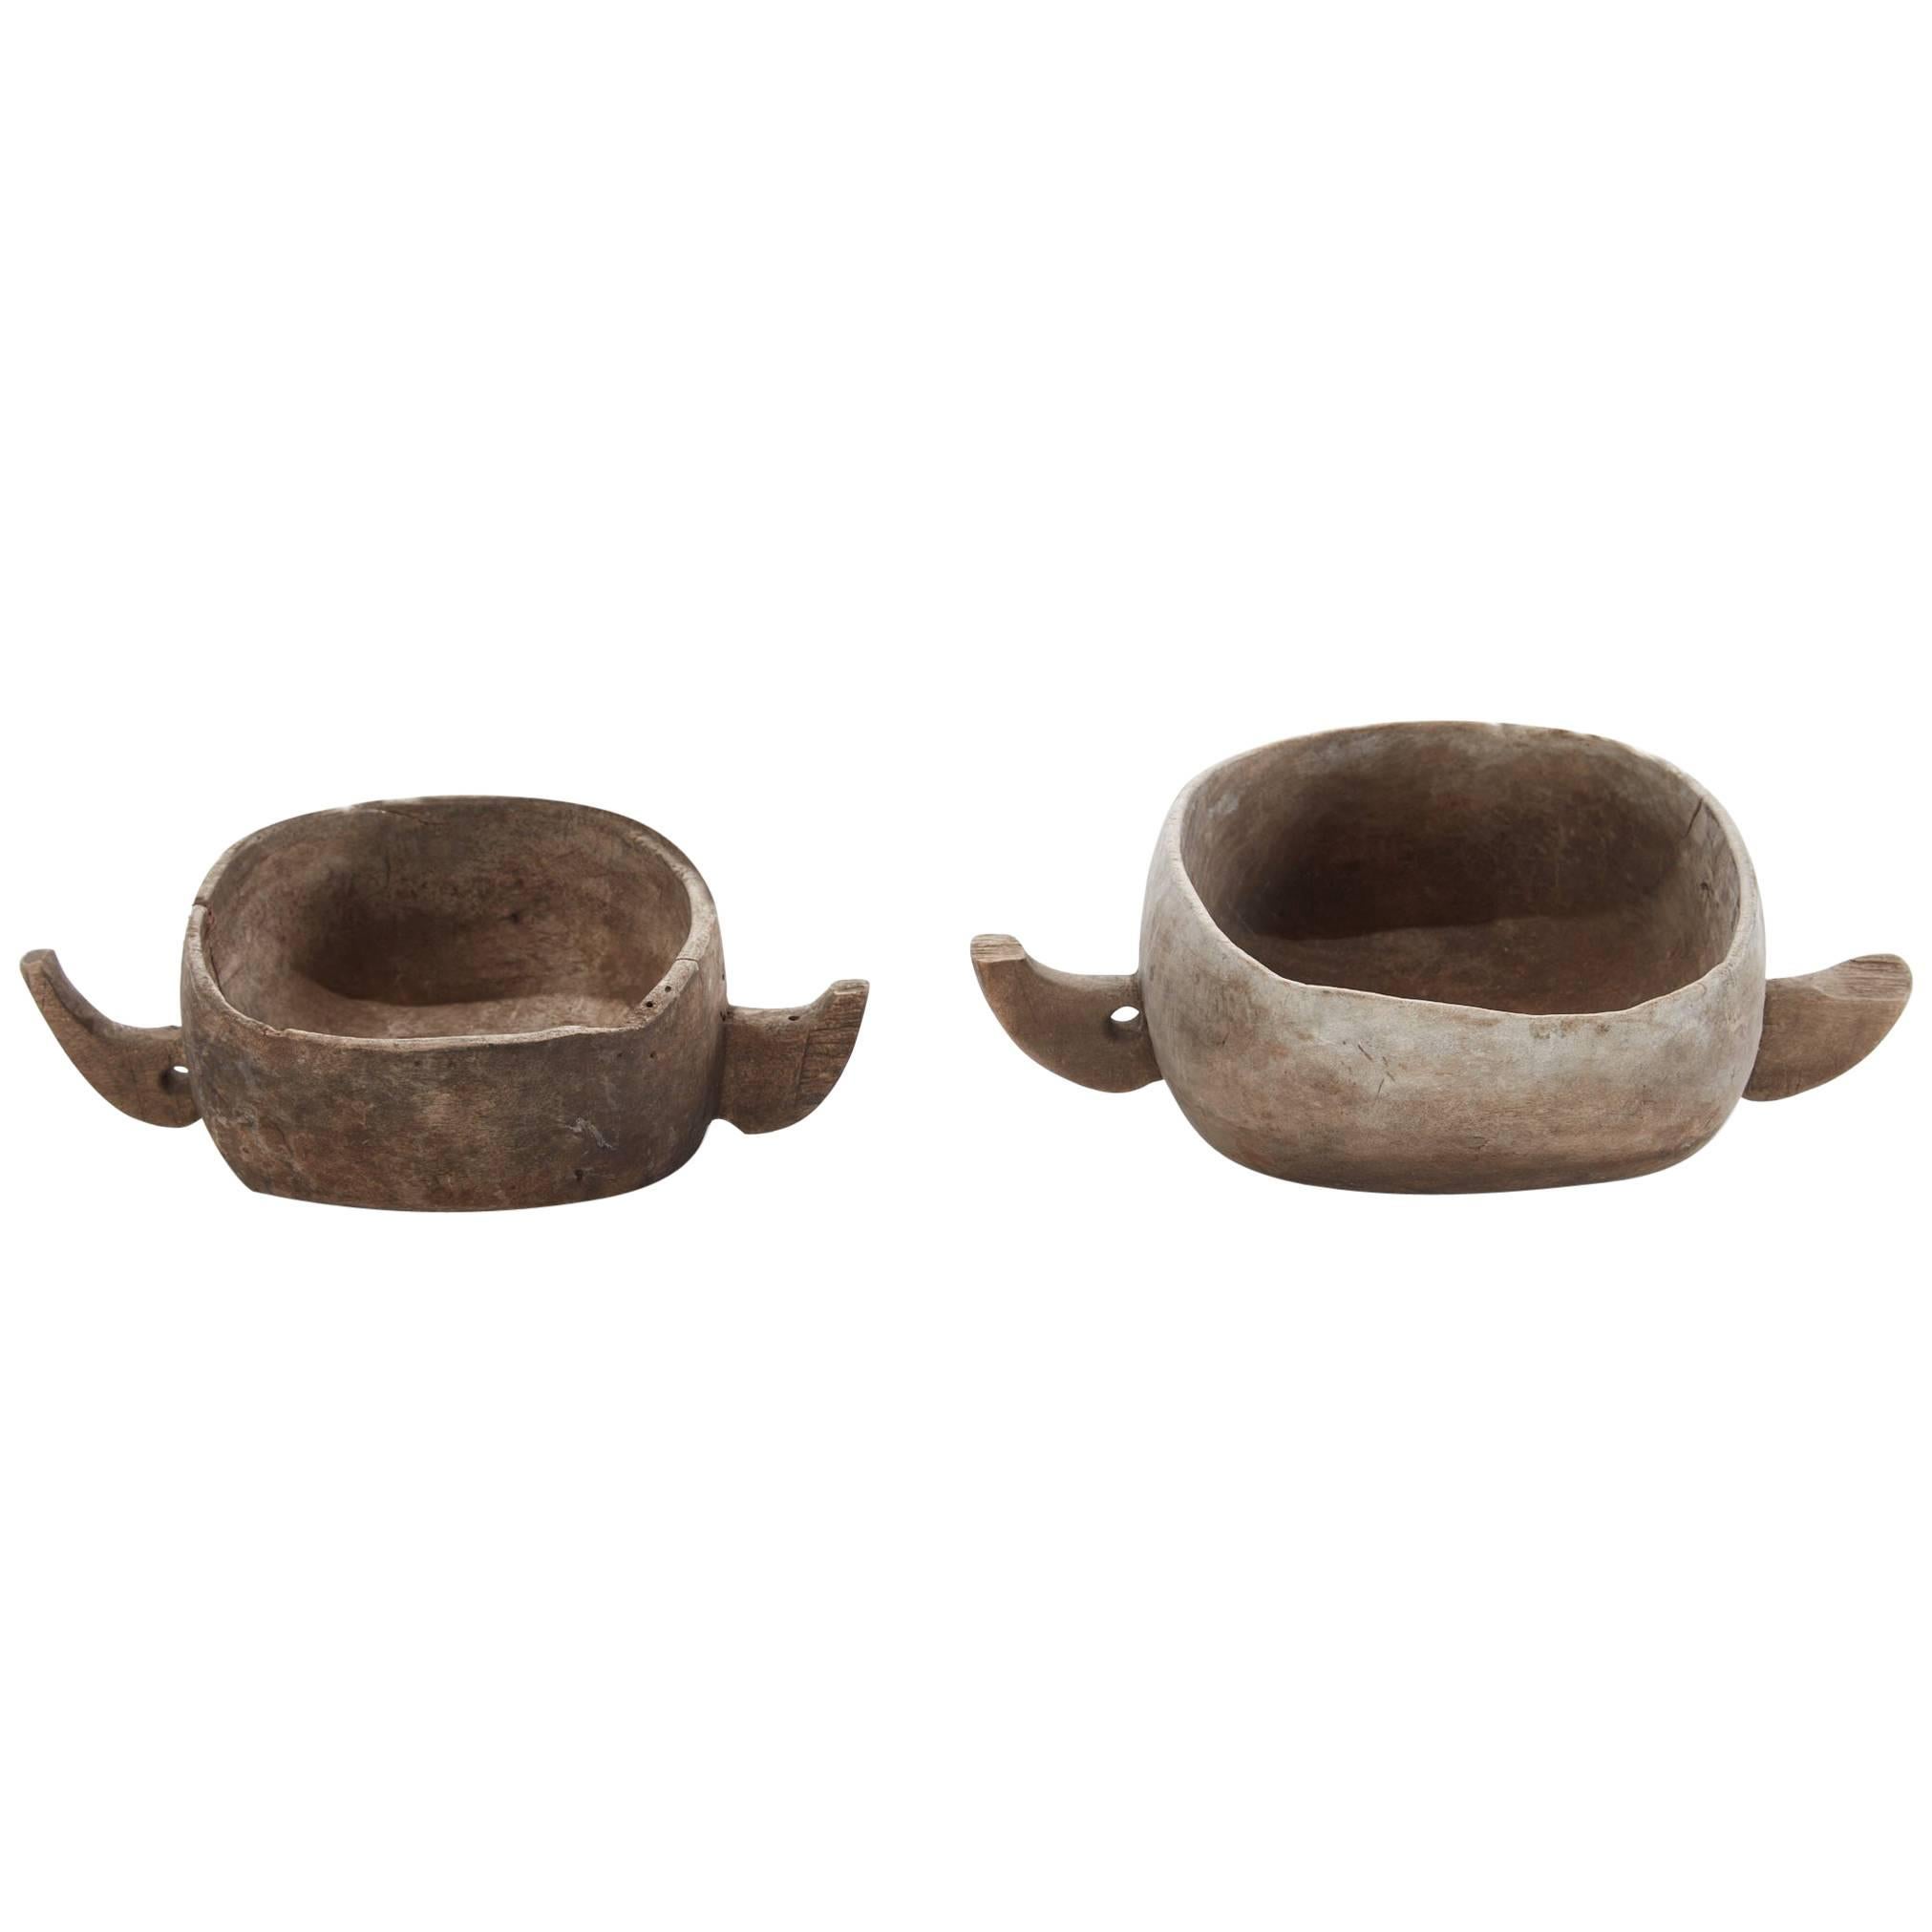 Pair of 20th Century East African Grain Bowls with Handles